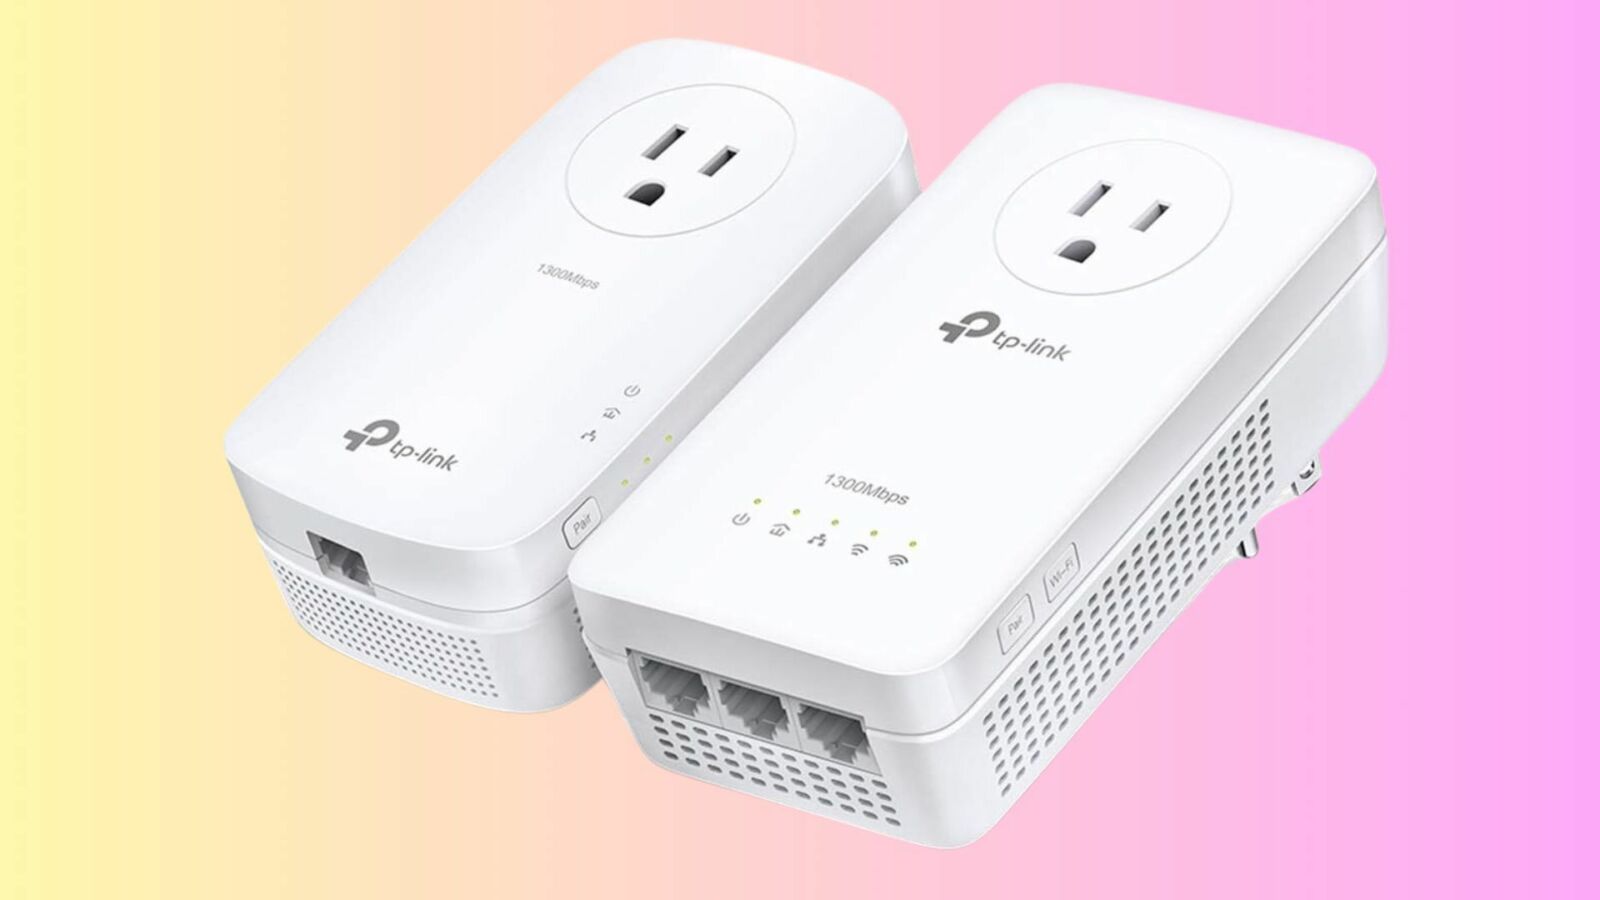 TP-Link Powerline AC1200 Dual Band WiFi Extender on Gradient Background